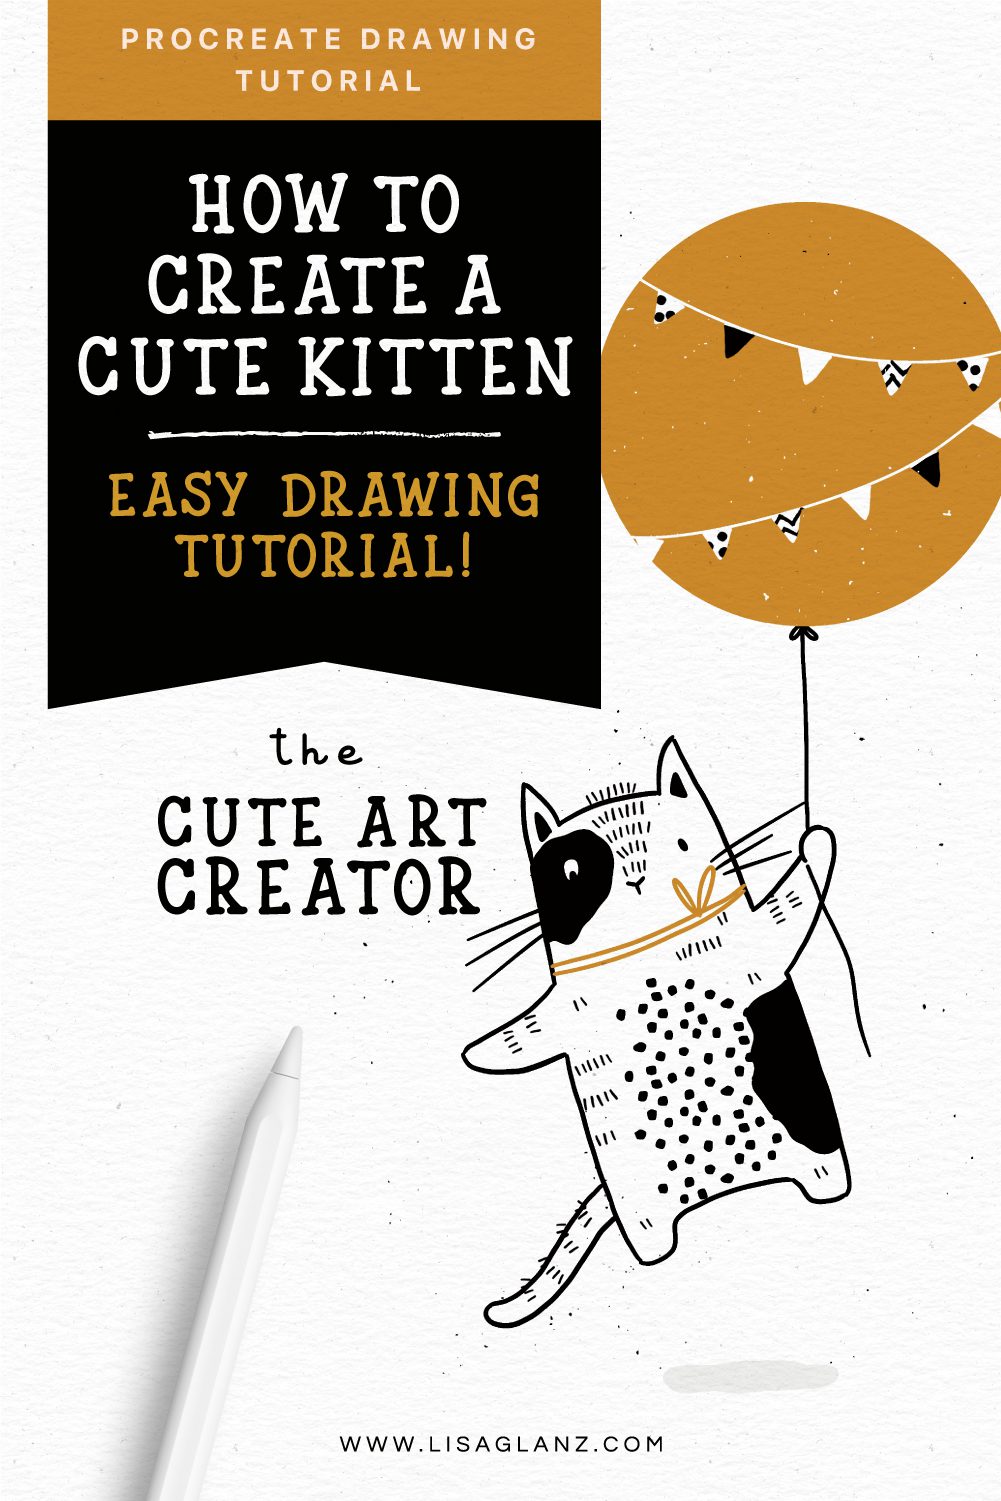 How to create a kitten in a cute modern style – an easy drawing tutorial